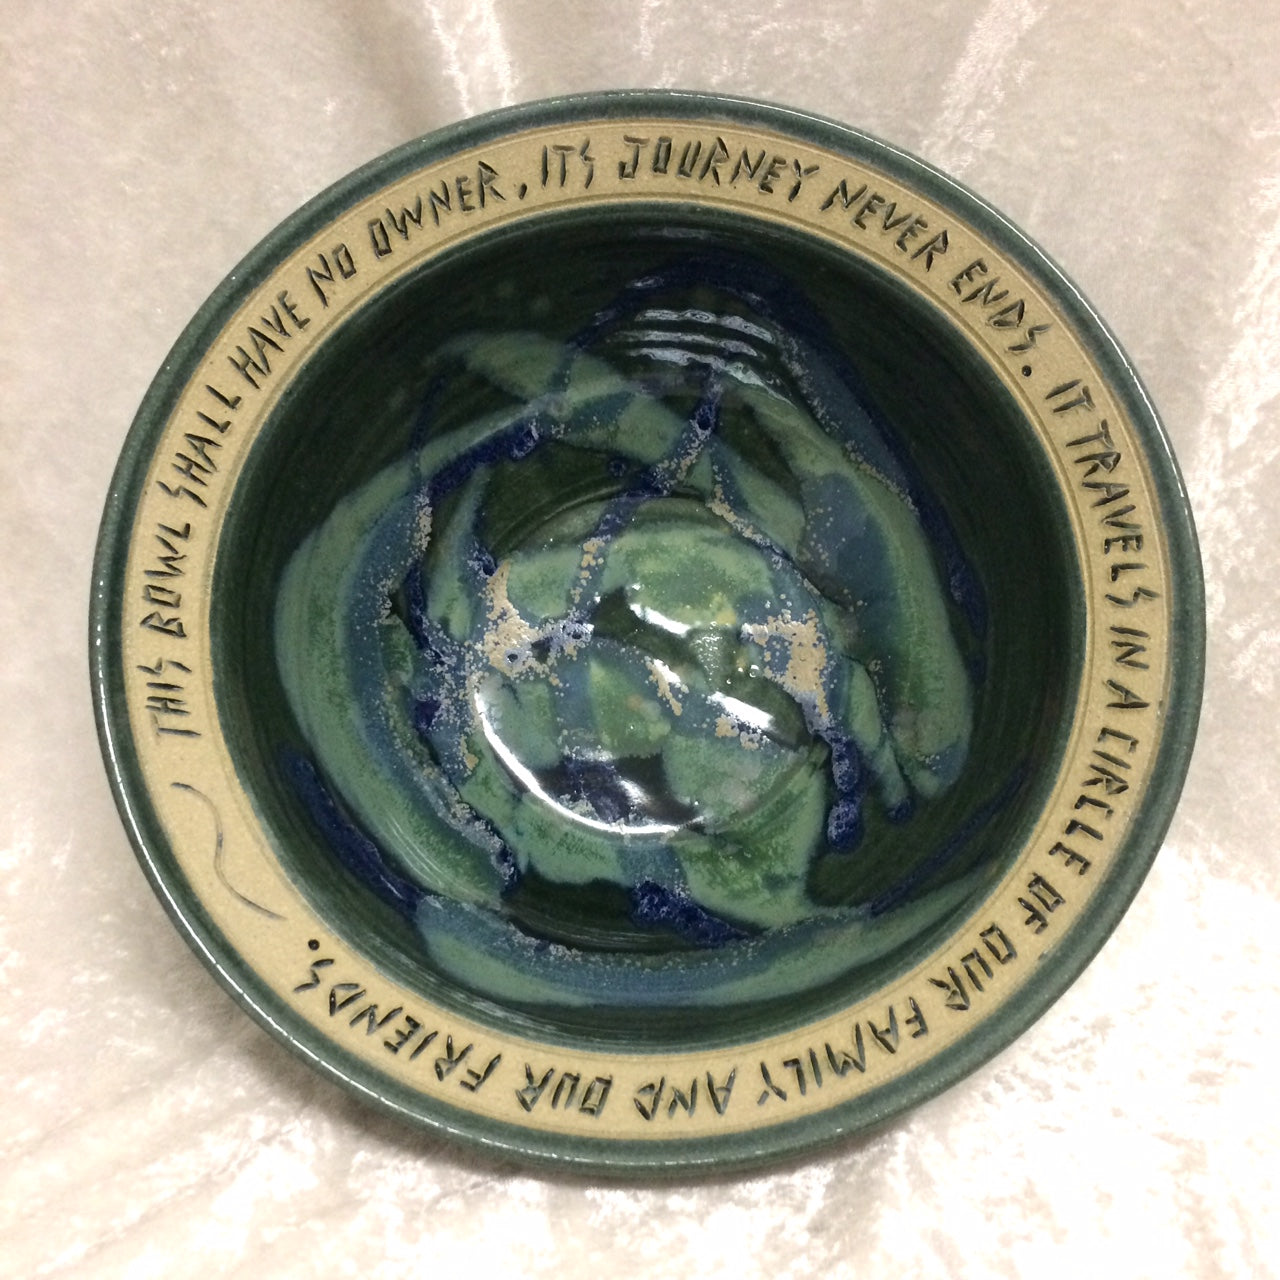 Blessing Bowl - "This Bowl Shall Have No Owner"